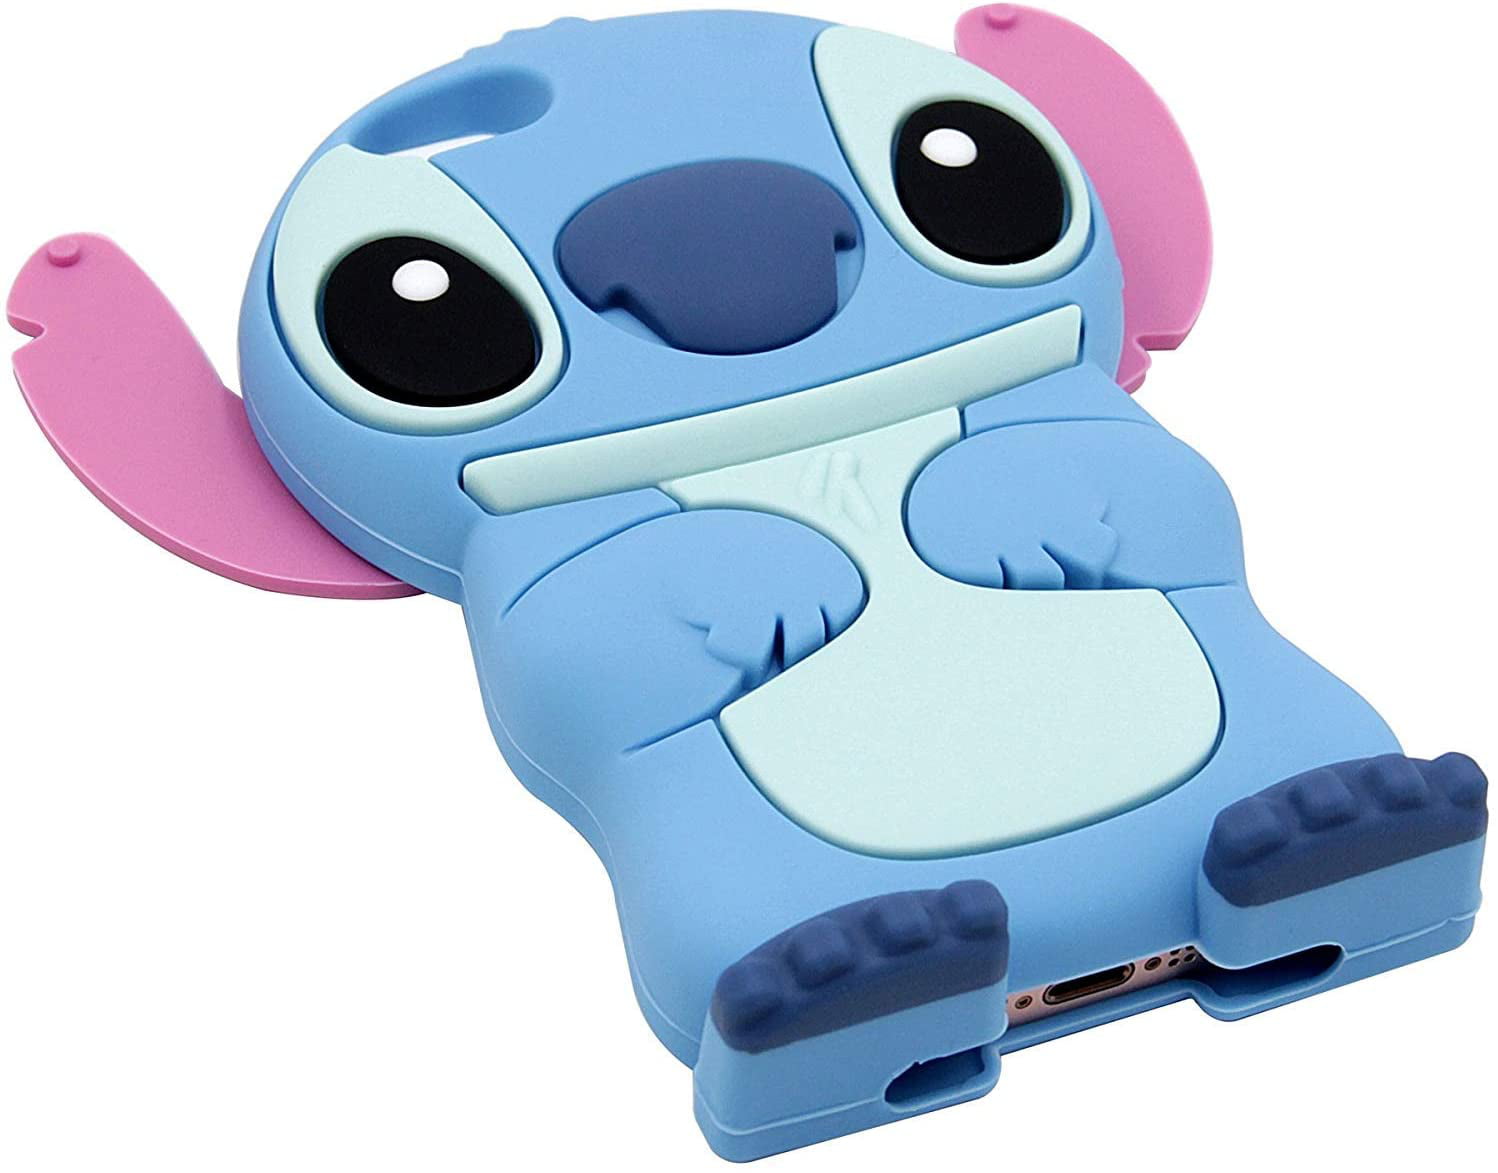 Blue Stitch Case for Apple iPod Touch 4 th 4th Generation 3D Cartoon Animal Cute Soft Silicone Rubber Character Cover,Kawaii Animated Funny Cool Skin Shell for Kids Guys Child Teens Girls Touch 4th 